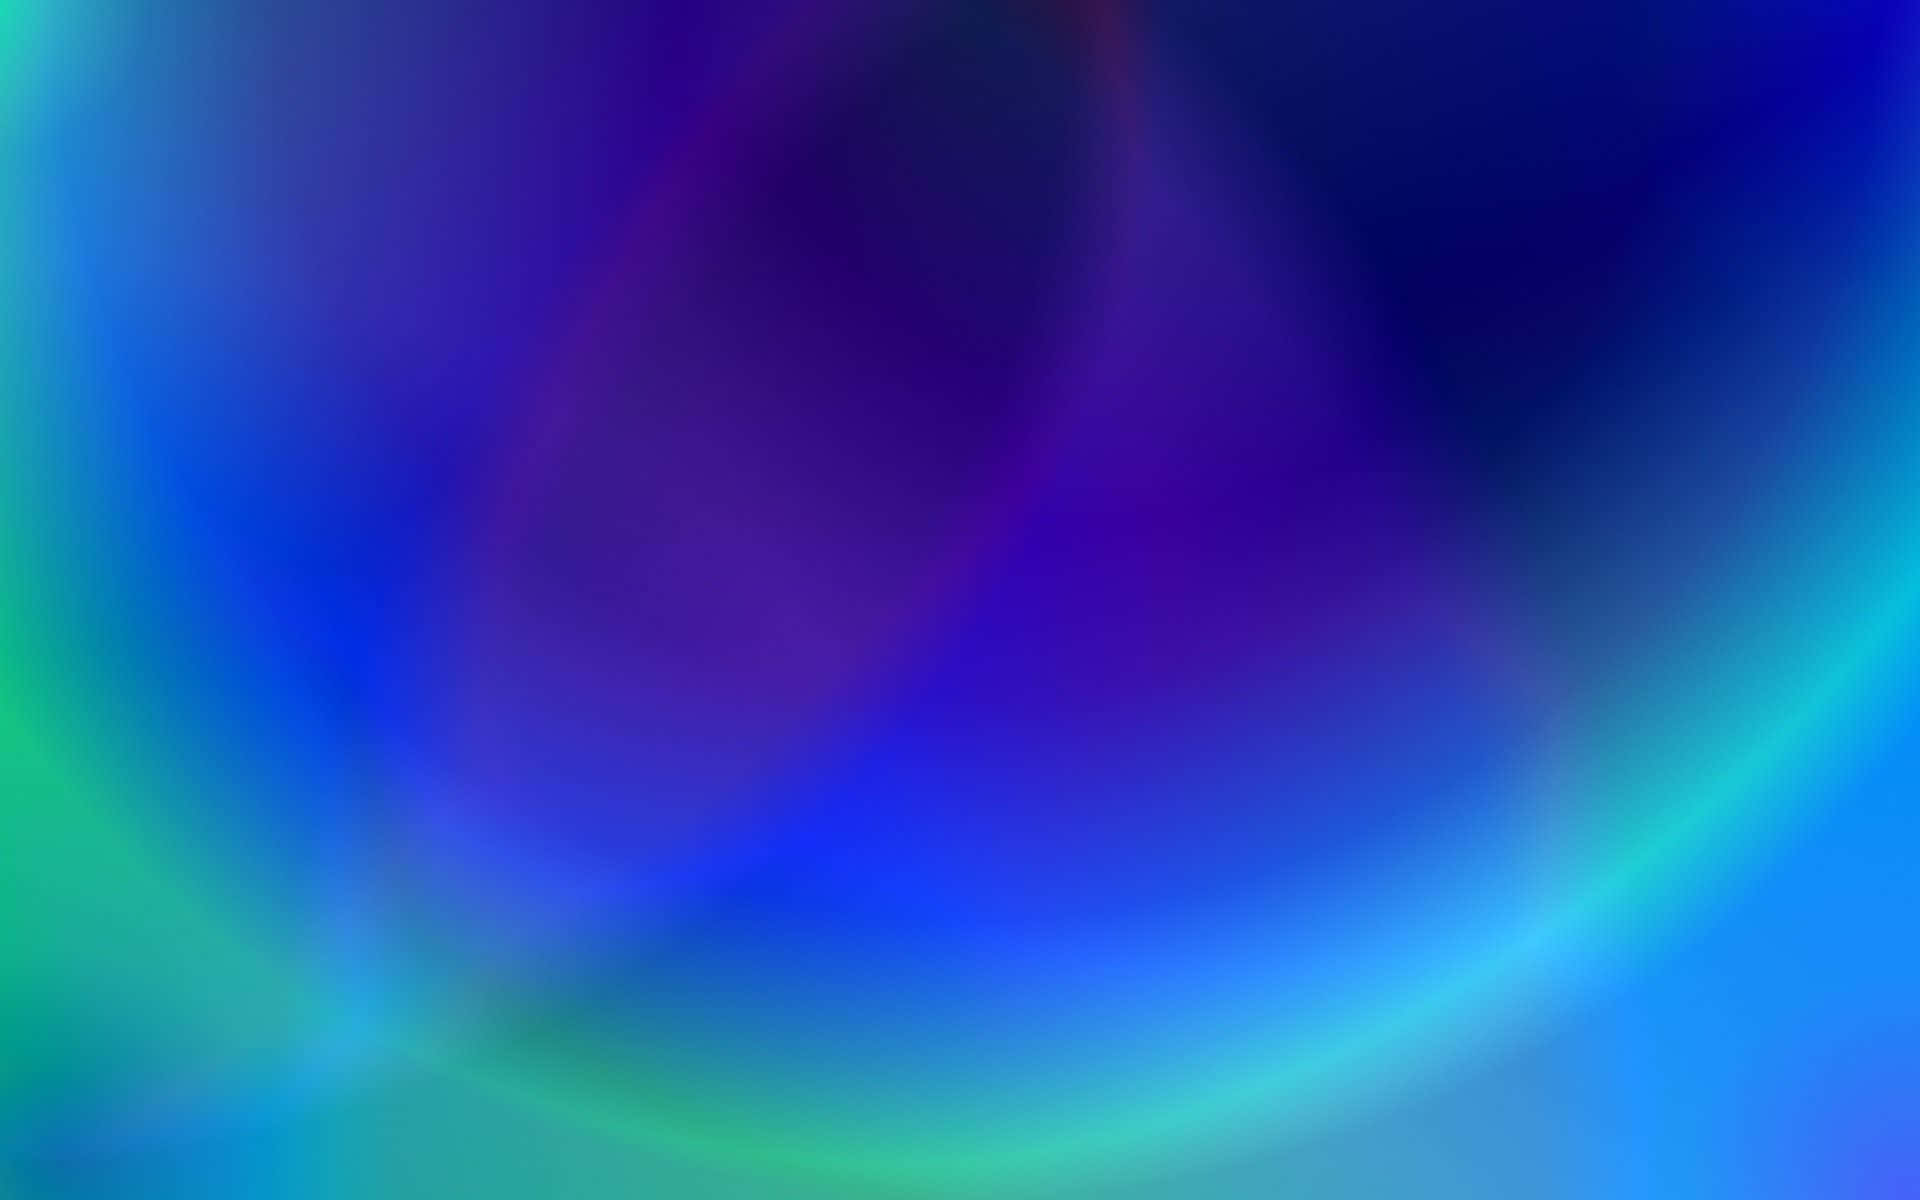 A Blue And Green Abstract Background Wallpaper